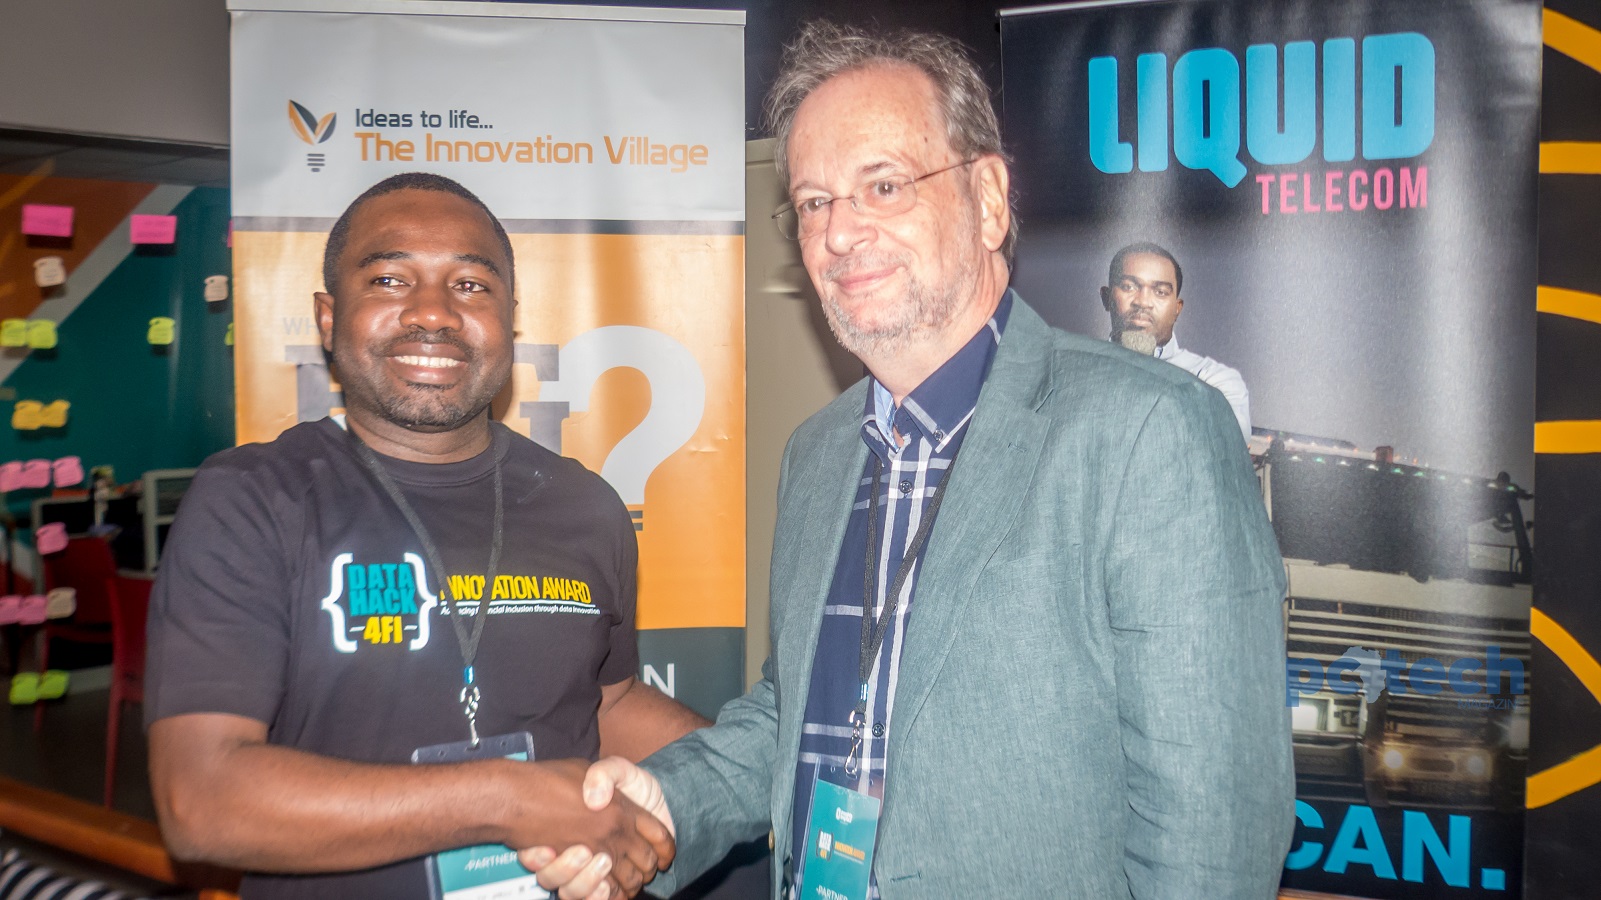 (In Pictorial from L-R): CK Japheth; CEO and Co-Founder of The Innovation Village and Hans Haerdlte; CEO Liquid Telecom Uganda shake hands in a new partnership to support Uganda based startup. This was during the press media briefing at the Innovation Village, Kampala on 30th November, 2017.